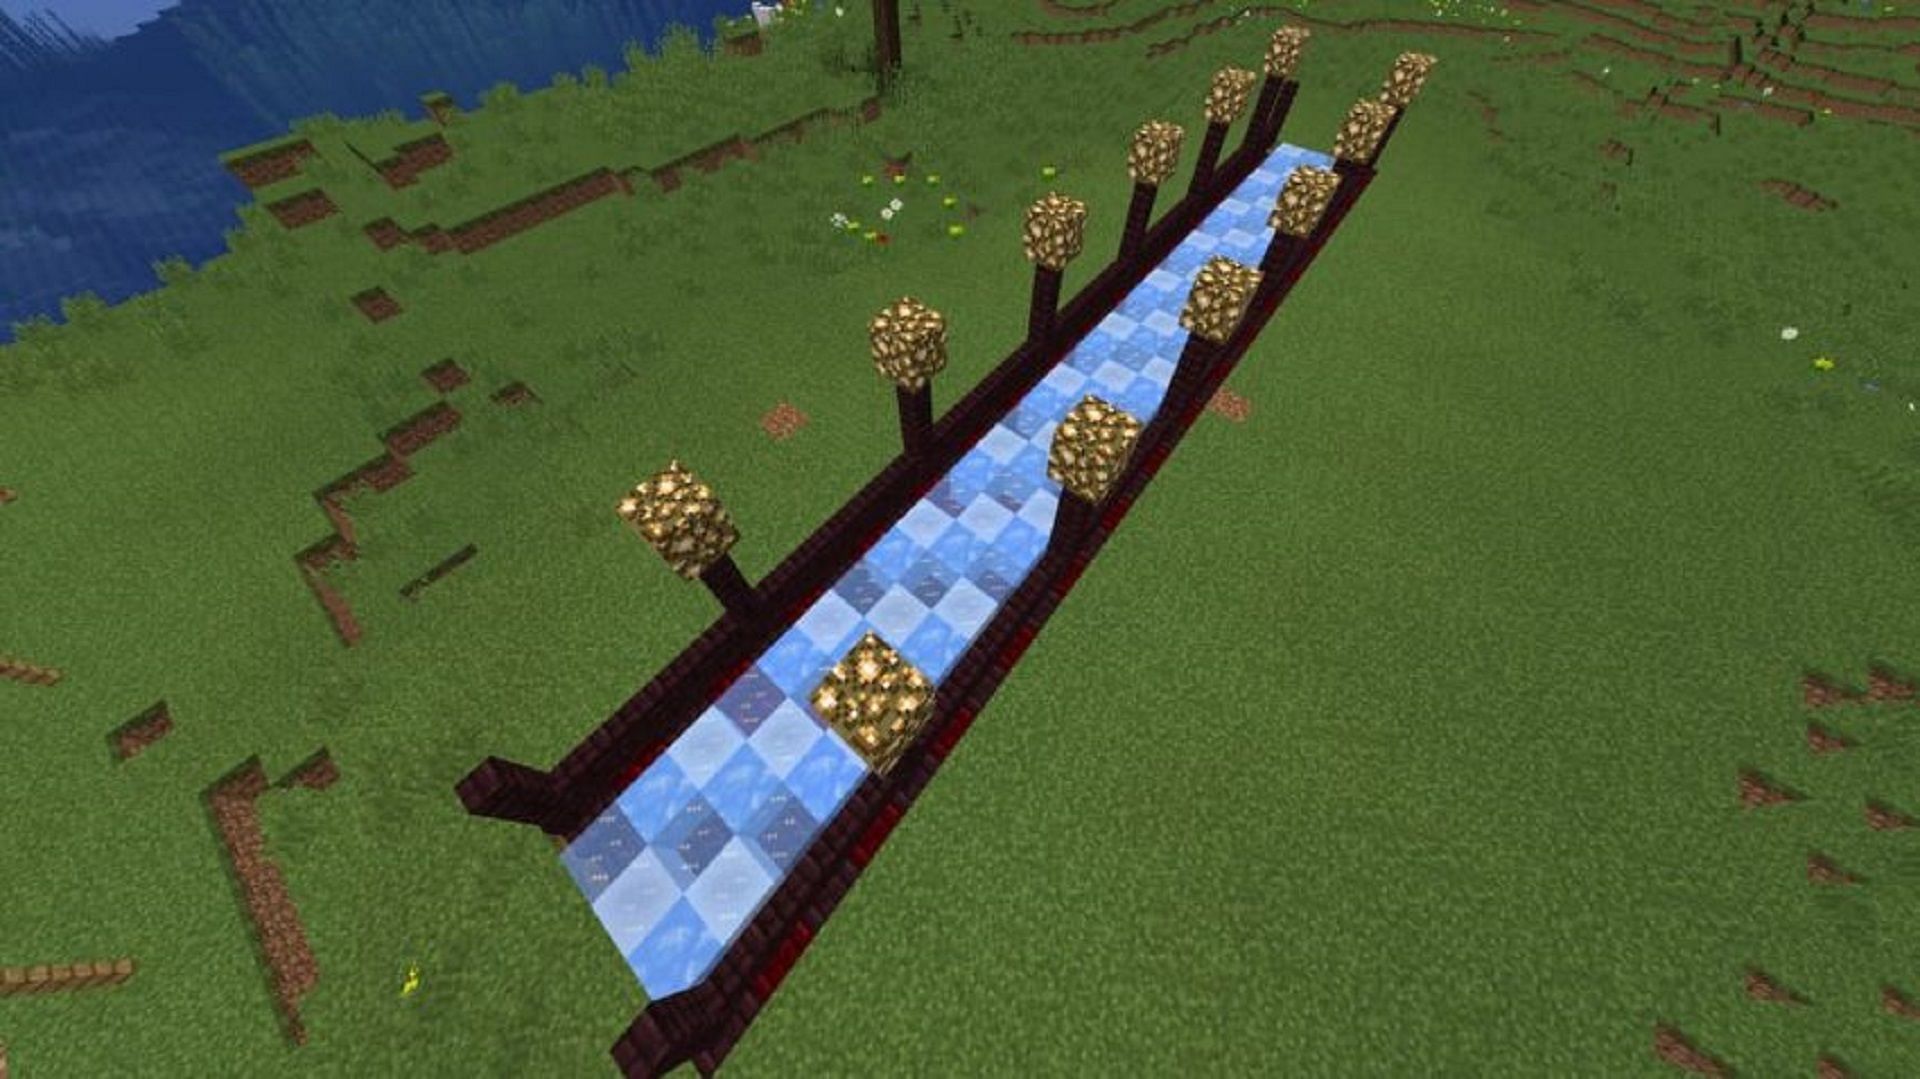 This path can help players move more quickly (Image via Mojang)